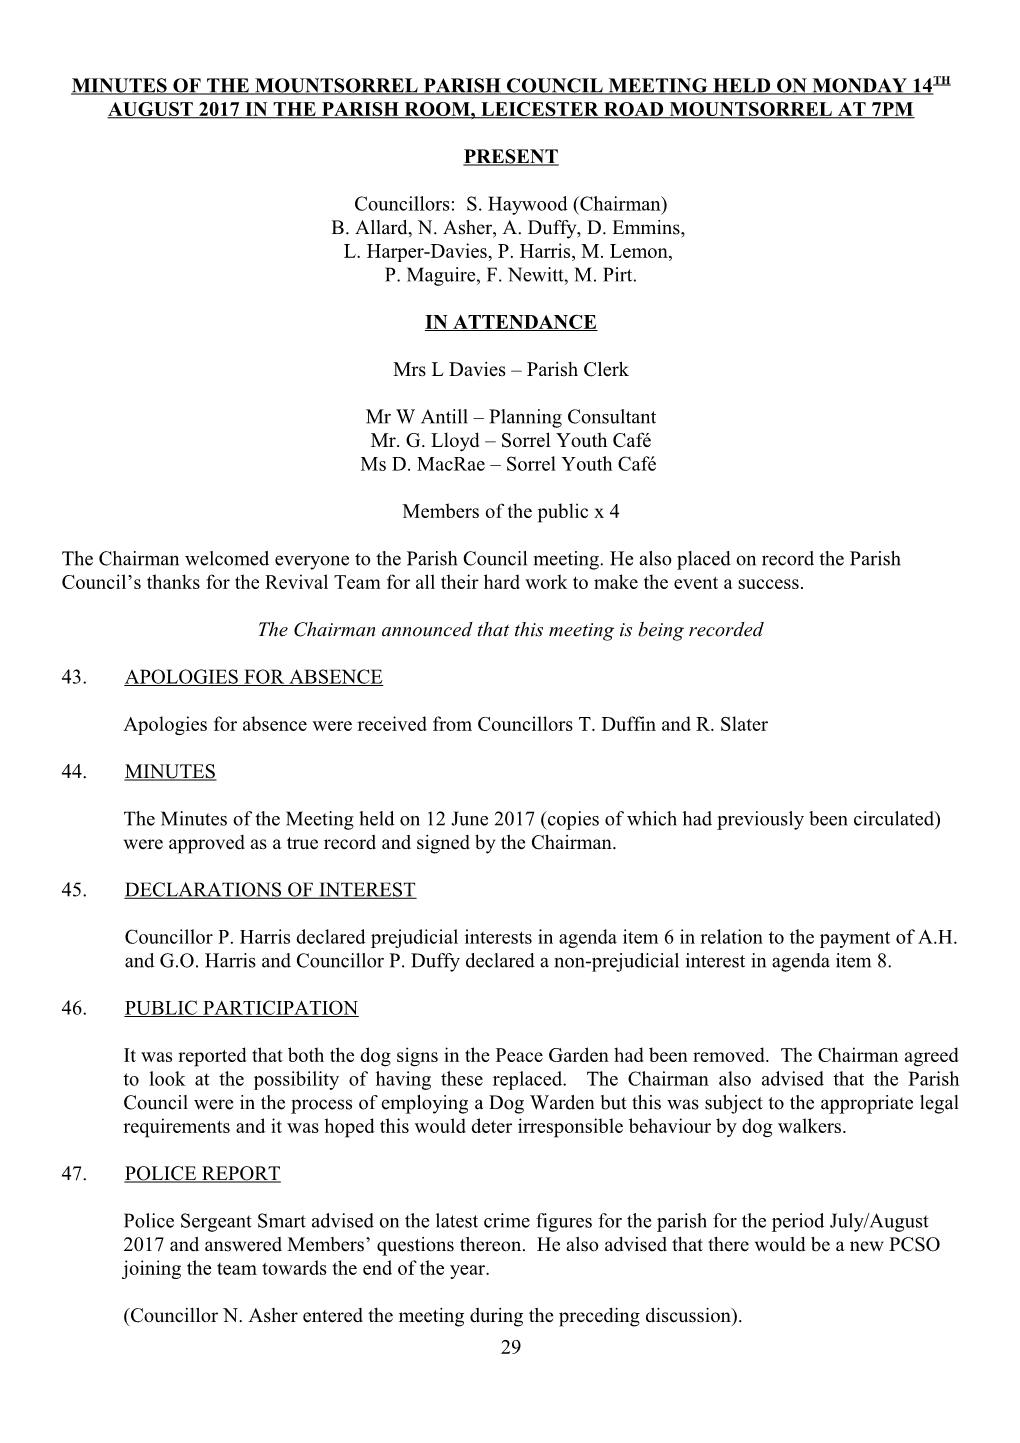 MINUTES of the MOUNTSORREL PARISH COUNCIL MEETING HELD on MONDAY 11Th MAY 2009 in the PARISH